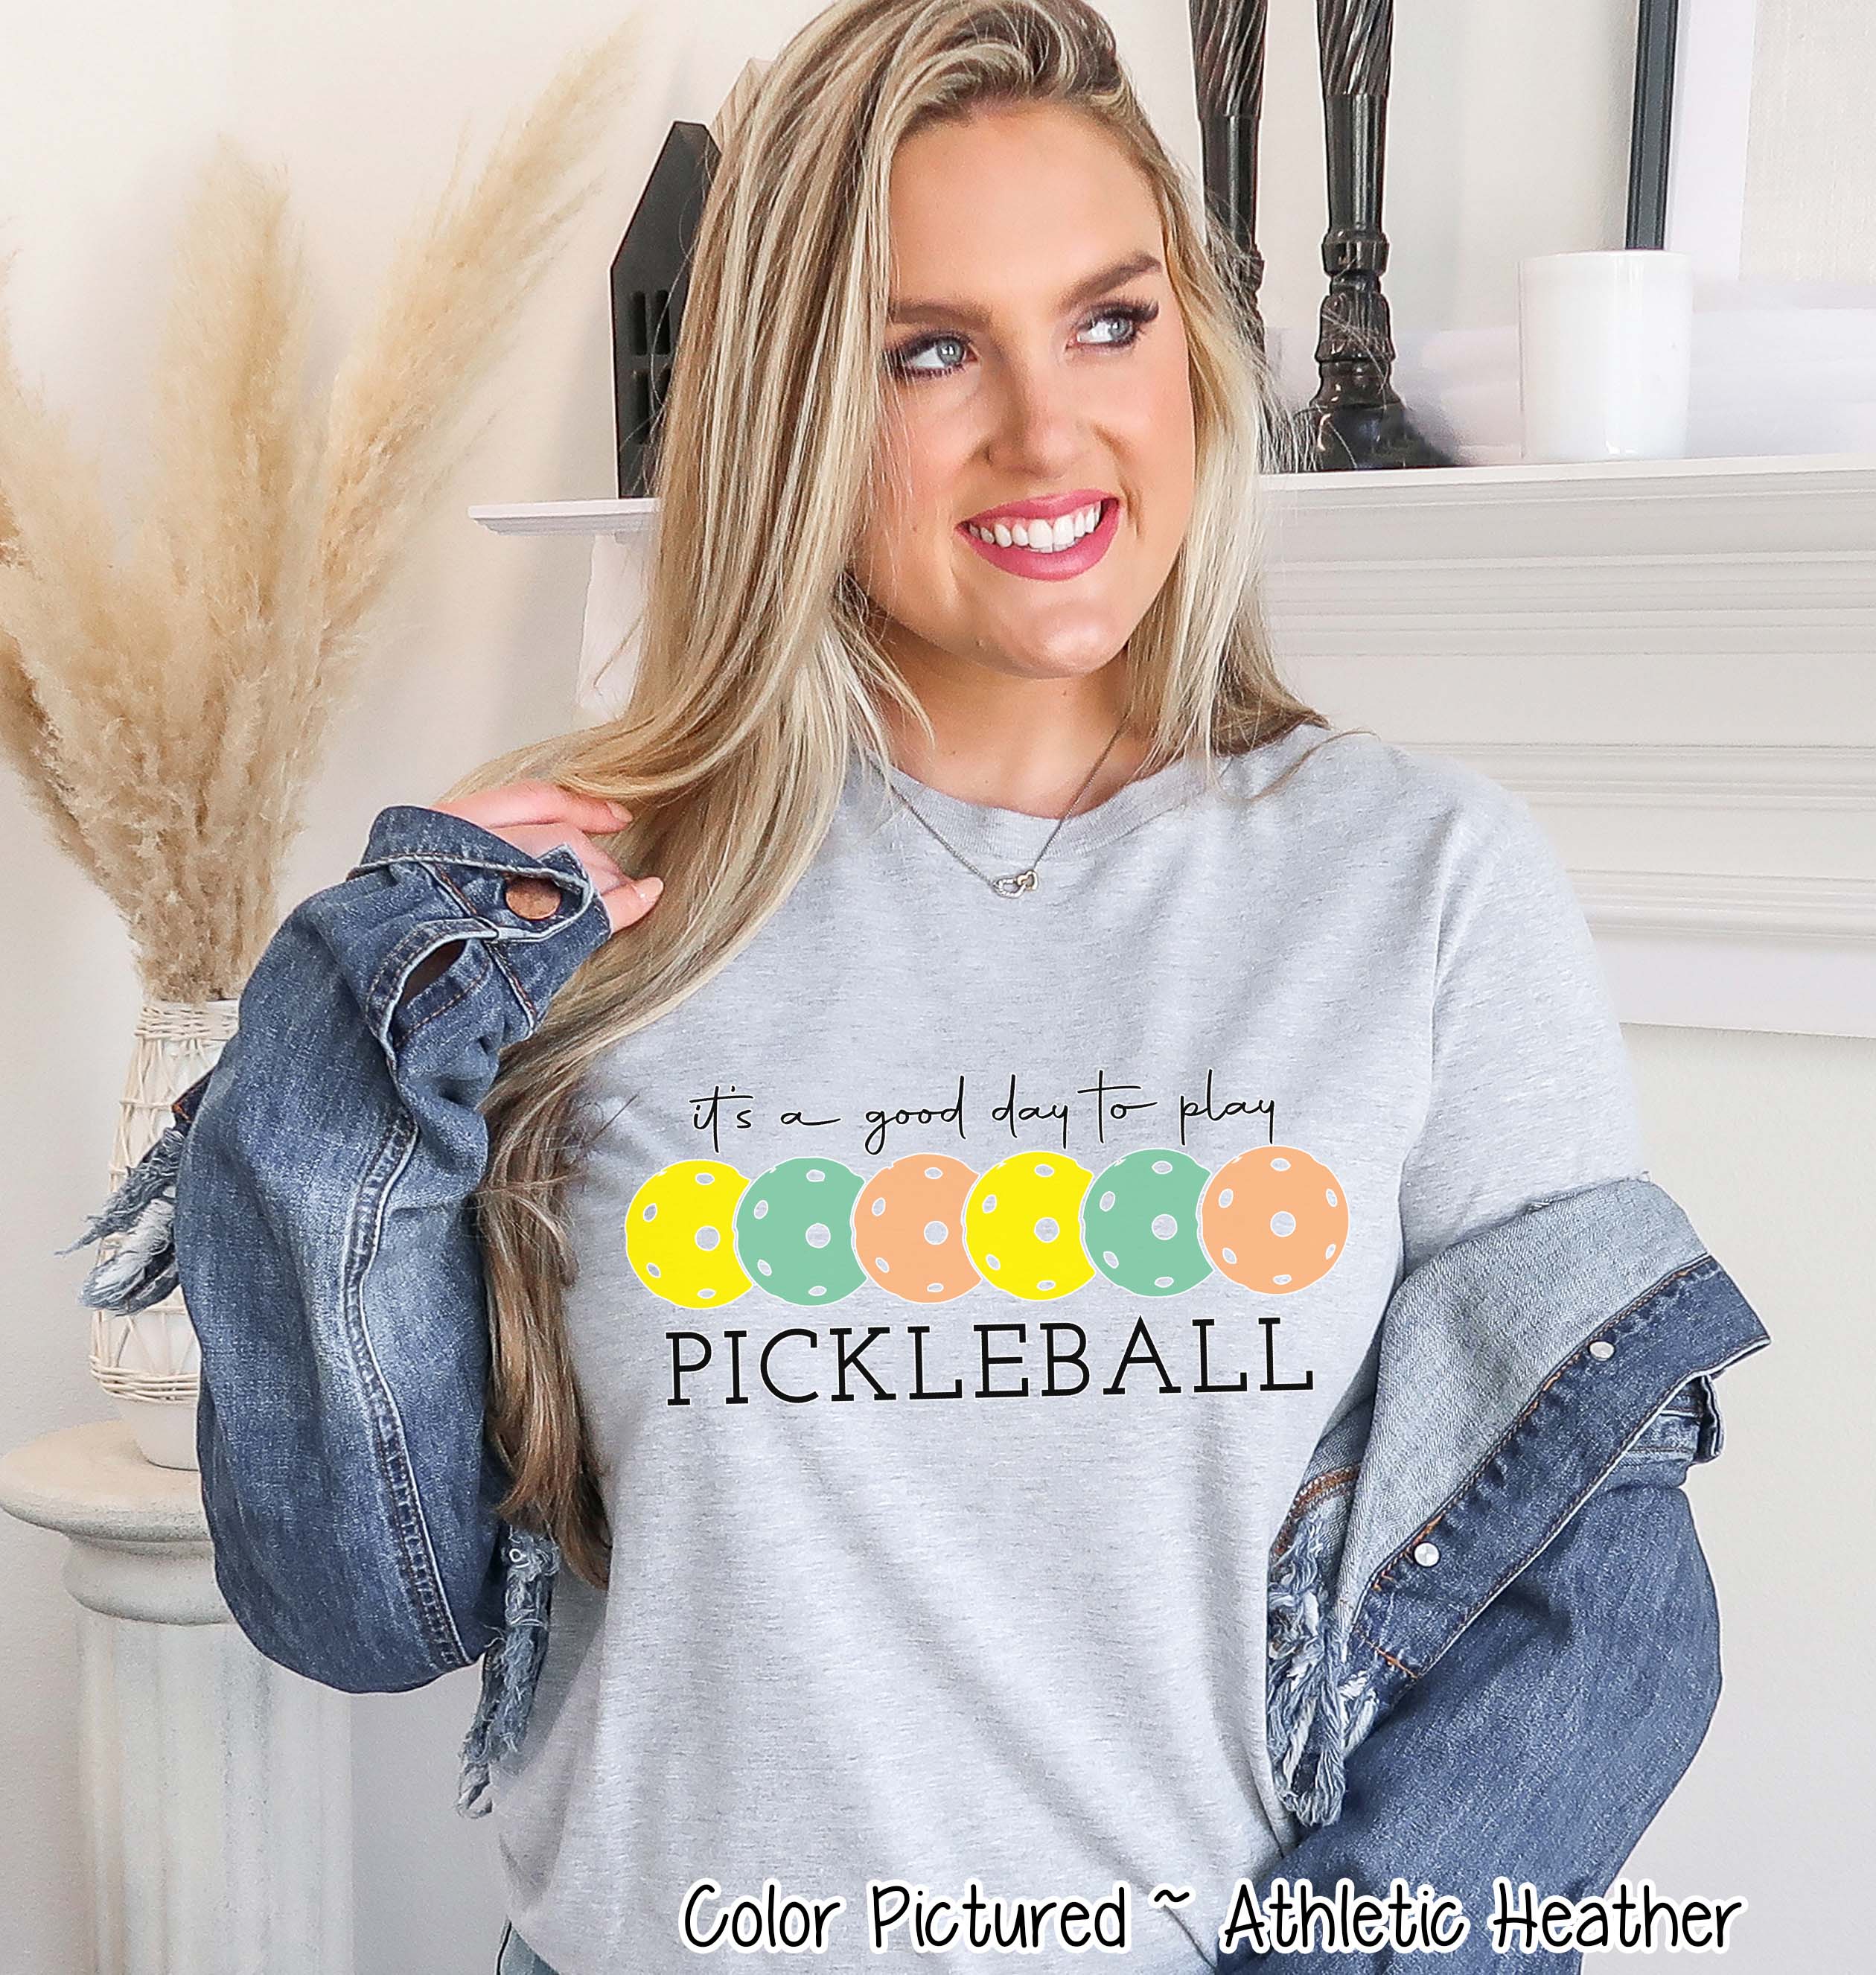 It's A Good Day to Play Pickleball Tee